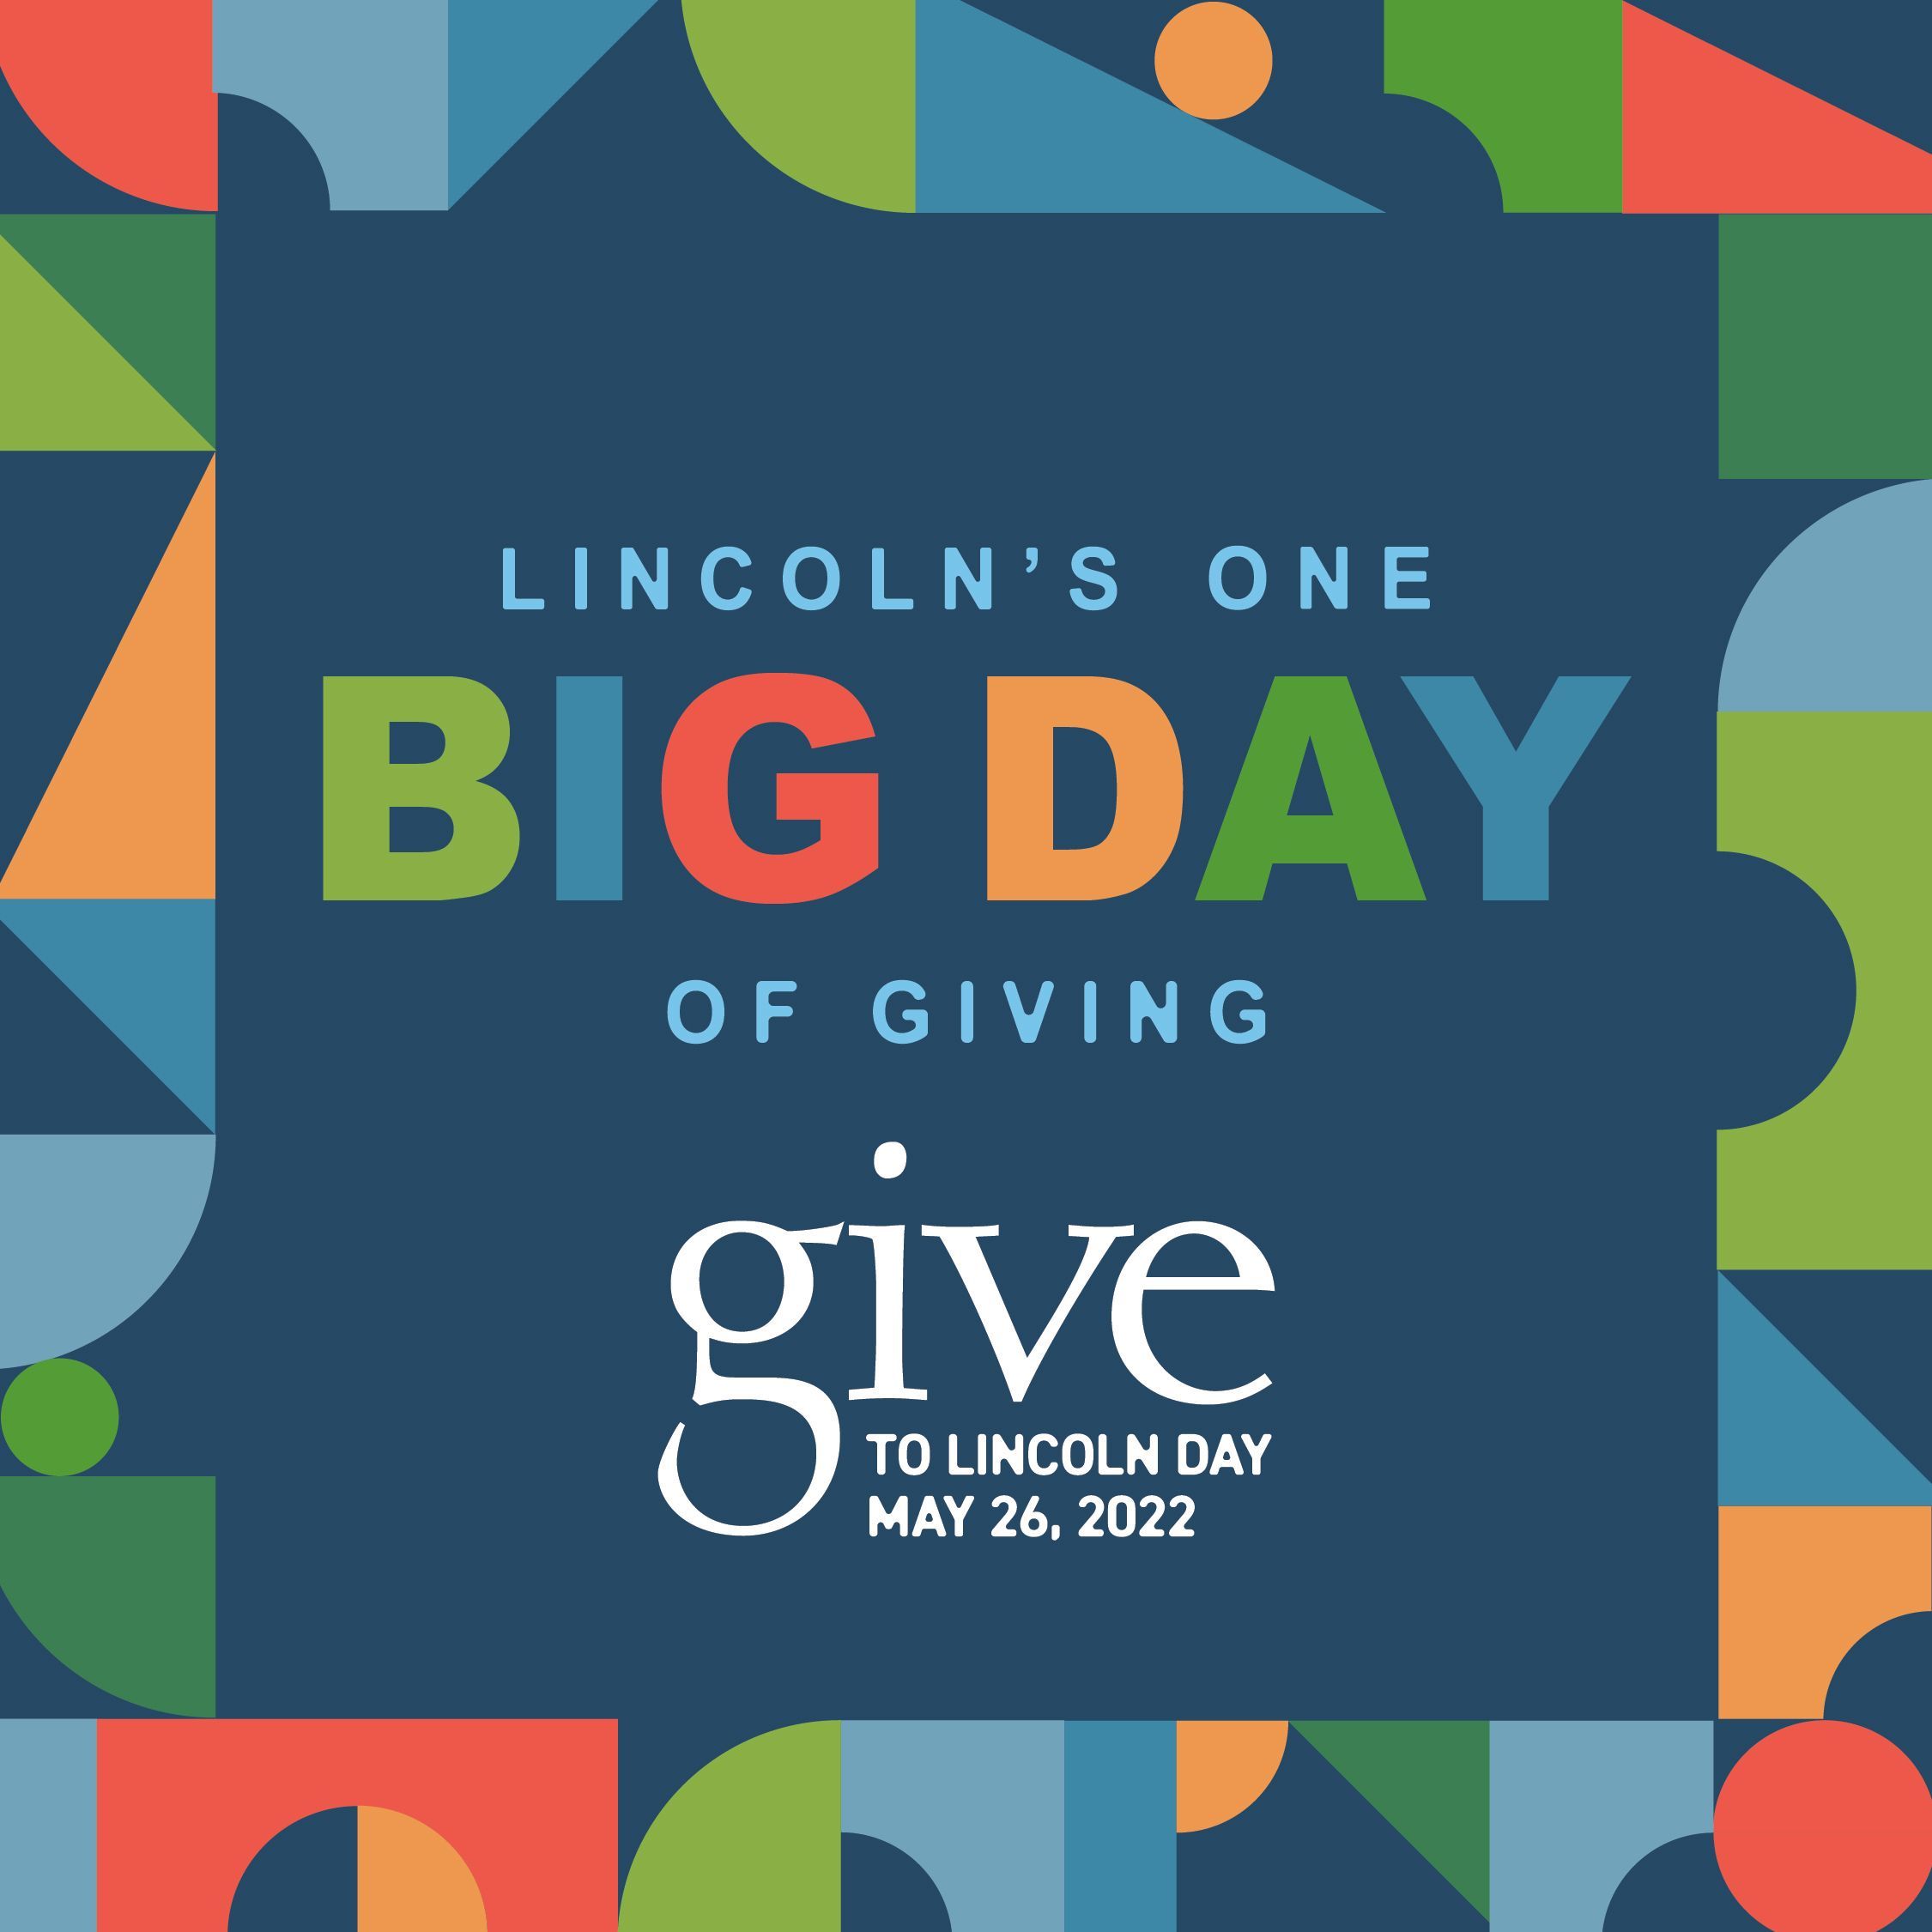 GIVE TO LINCOLN DAY